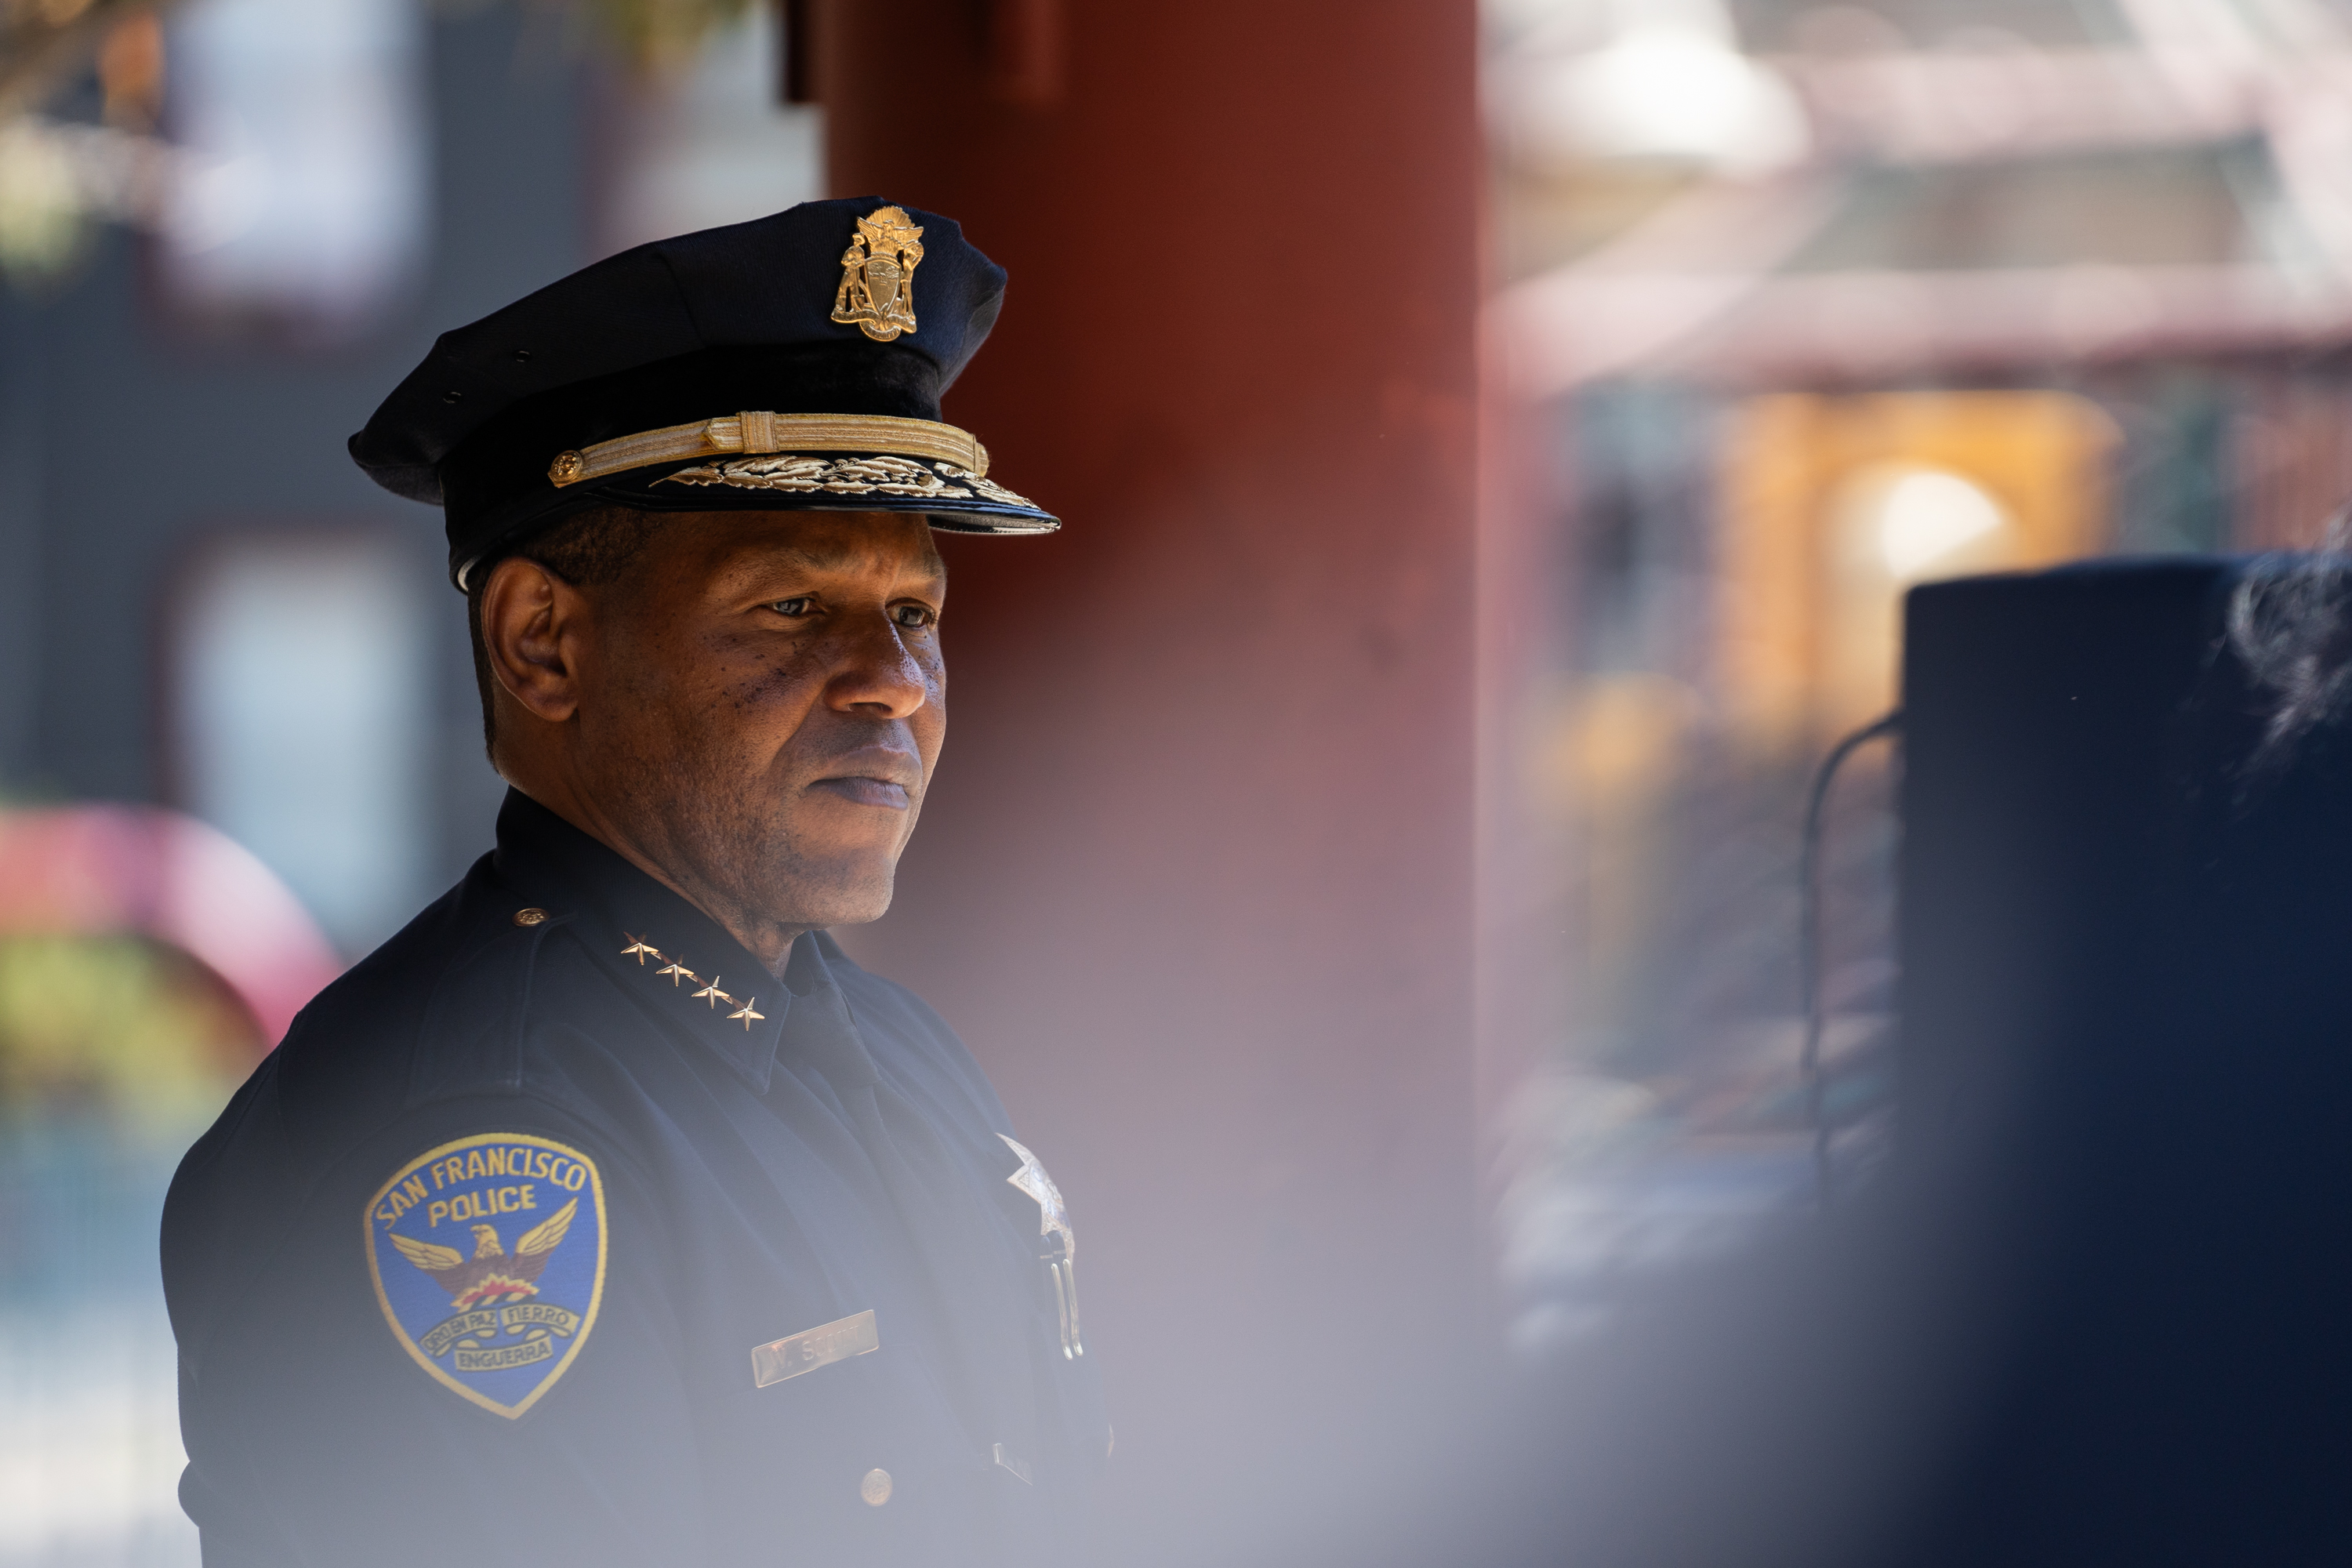 A police chief stands at an event.